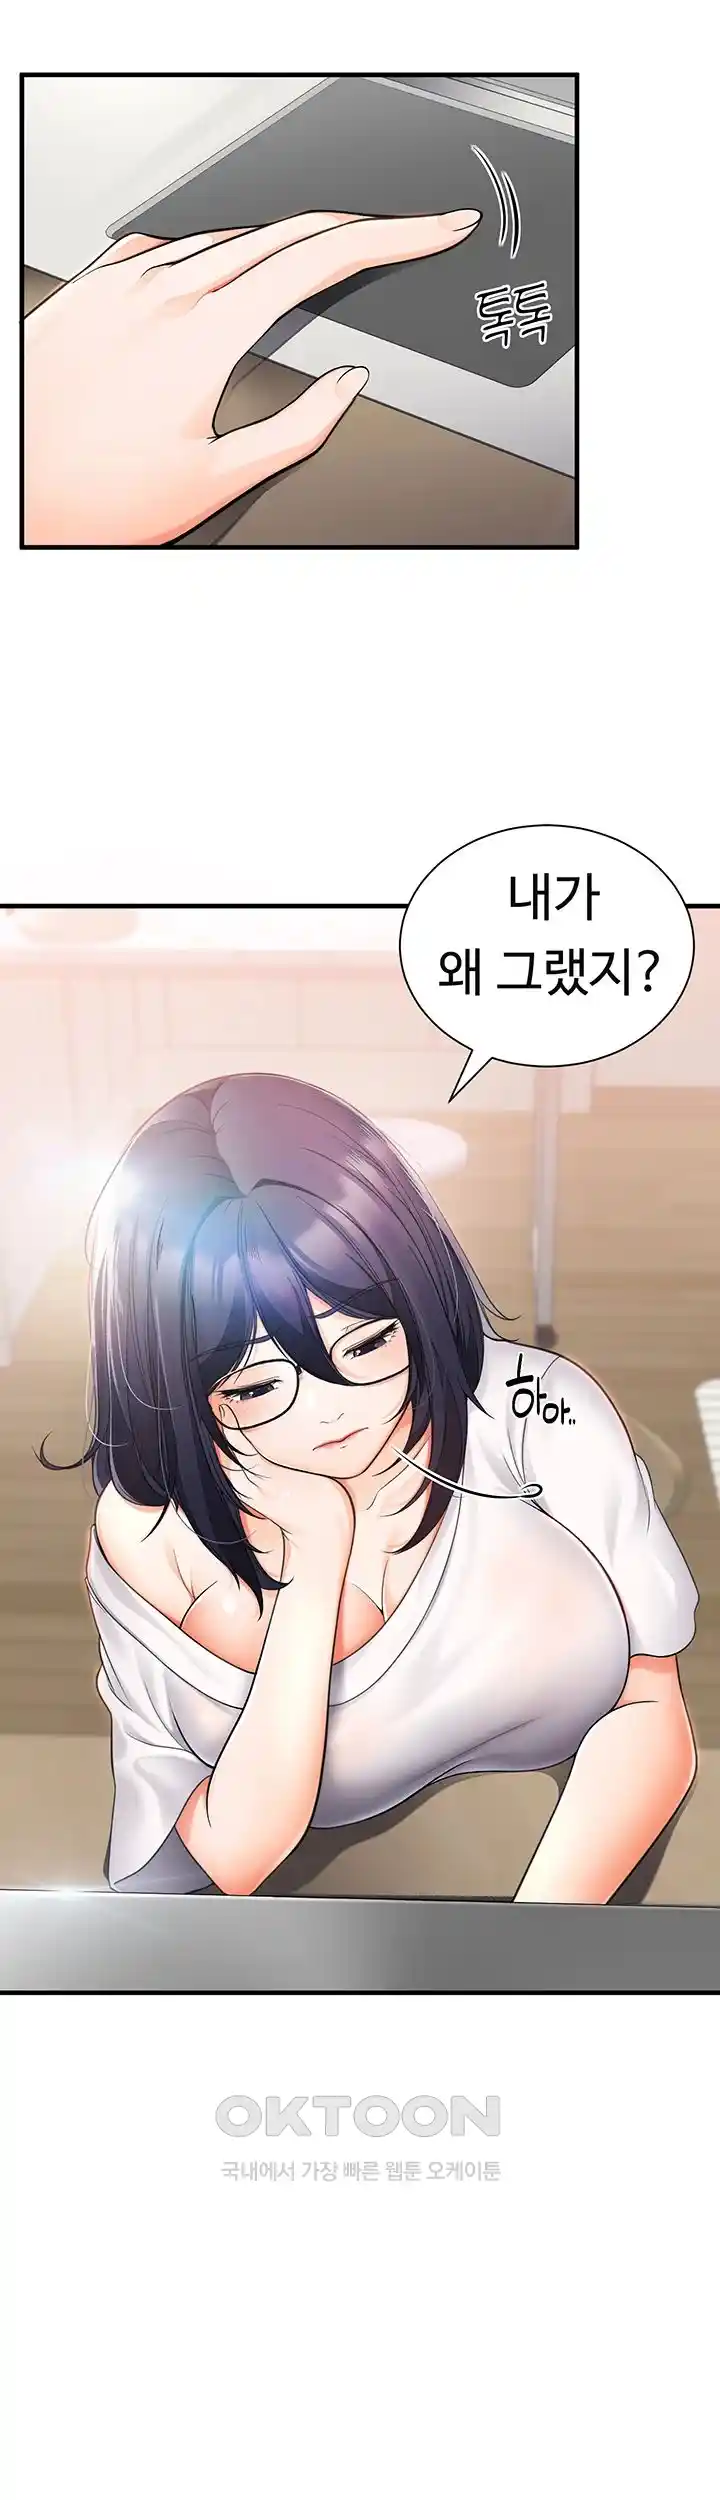 The Student Council President’s Hidden Task Is the (Sexual) Development of Female Students Raw Chapter 3 - Page 6